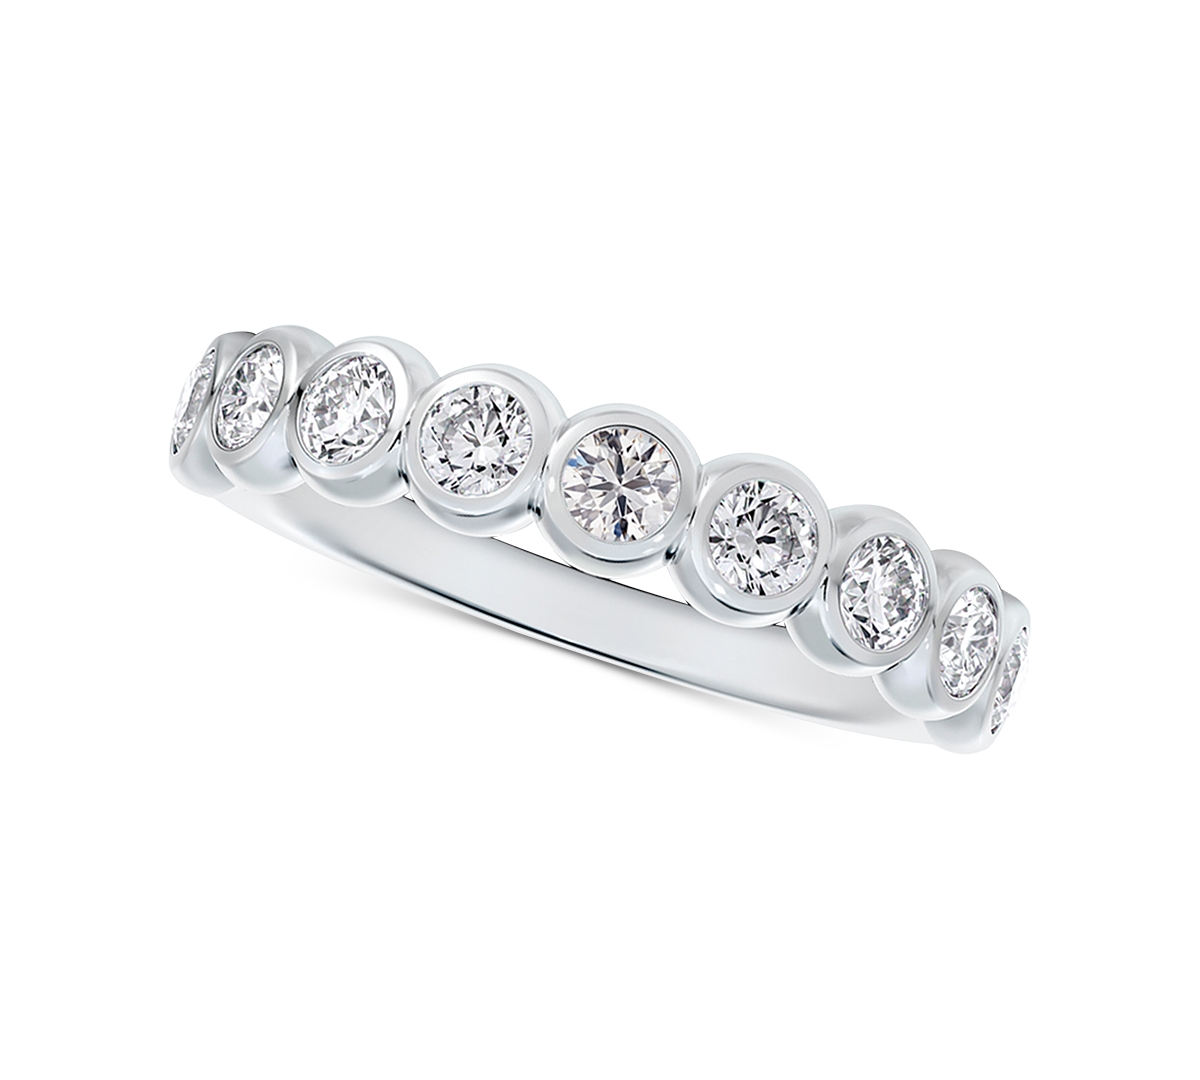 Portfolio by De Beers Forevermark Diamond Bezel Diamond Stackable Ring (3/4 ct. t.w.) in 14k White or Yellow Gold - White Gold